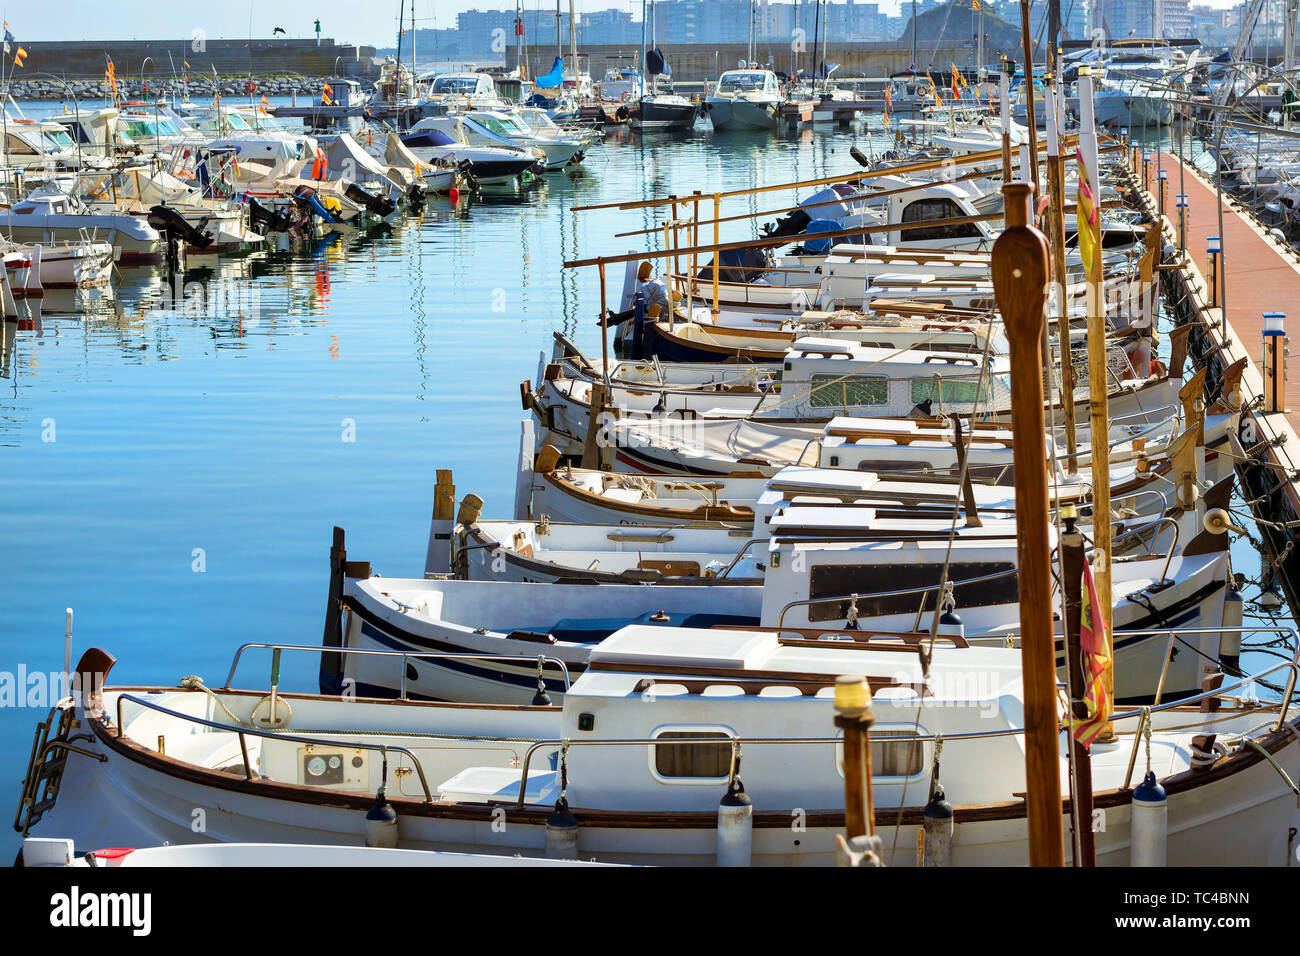 Private yachts and fishing boats moored at pier in seaport Blanes. Sailing and motor boats are moored at seawall. Vessels with catch of sea fish delicacies. Marina Blanes, Spain, Costa Brava Stock Photo